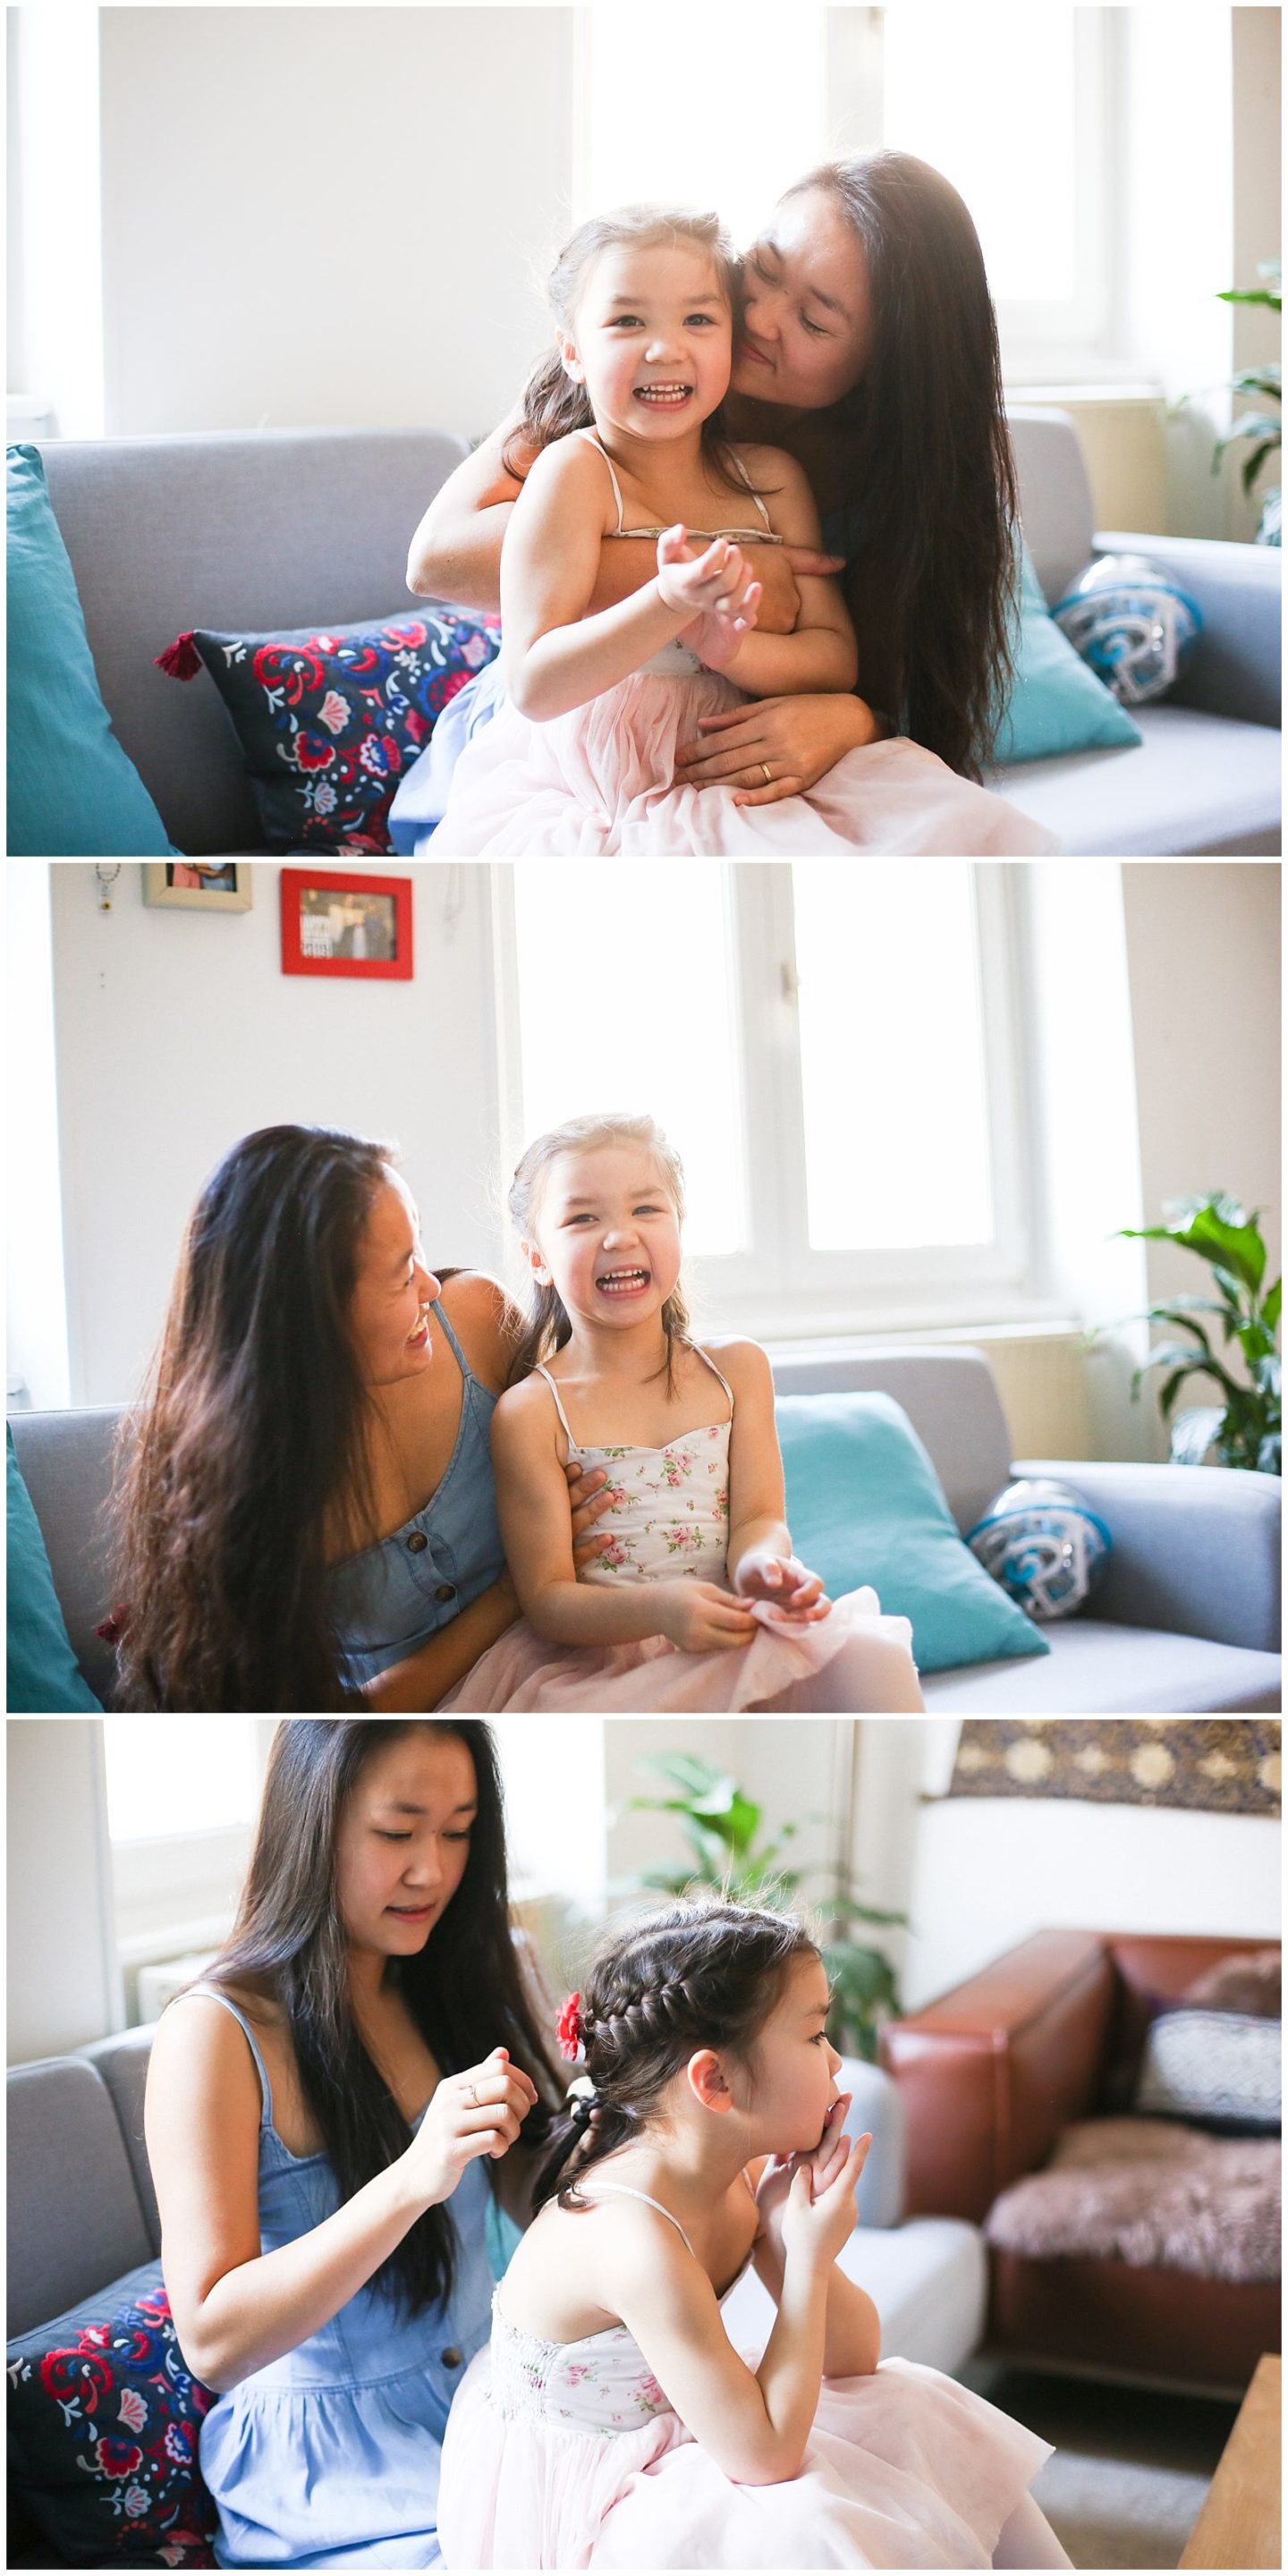 mother braids child's hair during Home Lifestyle Family Photo Session in France